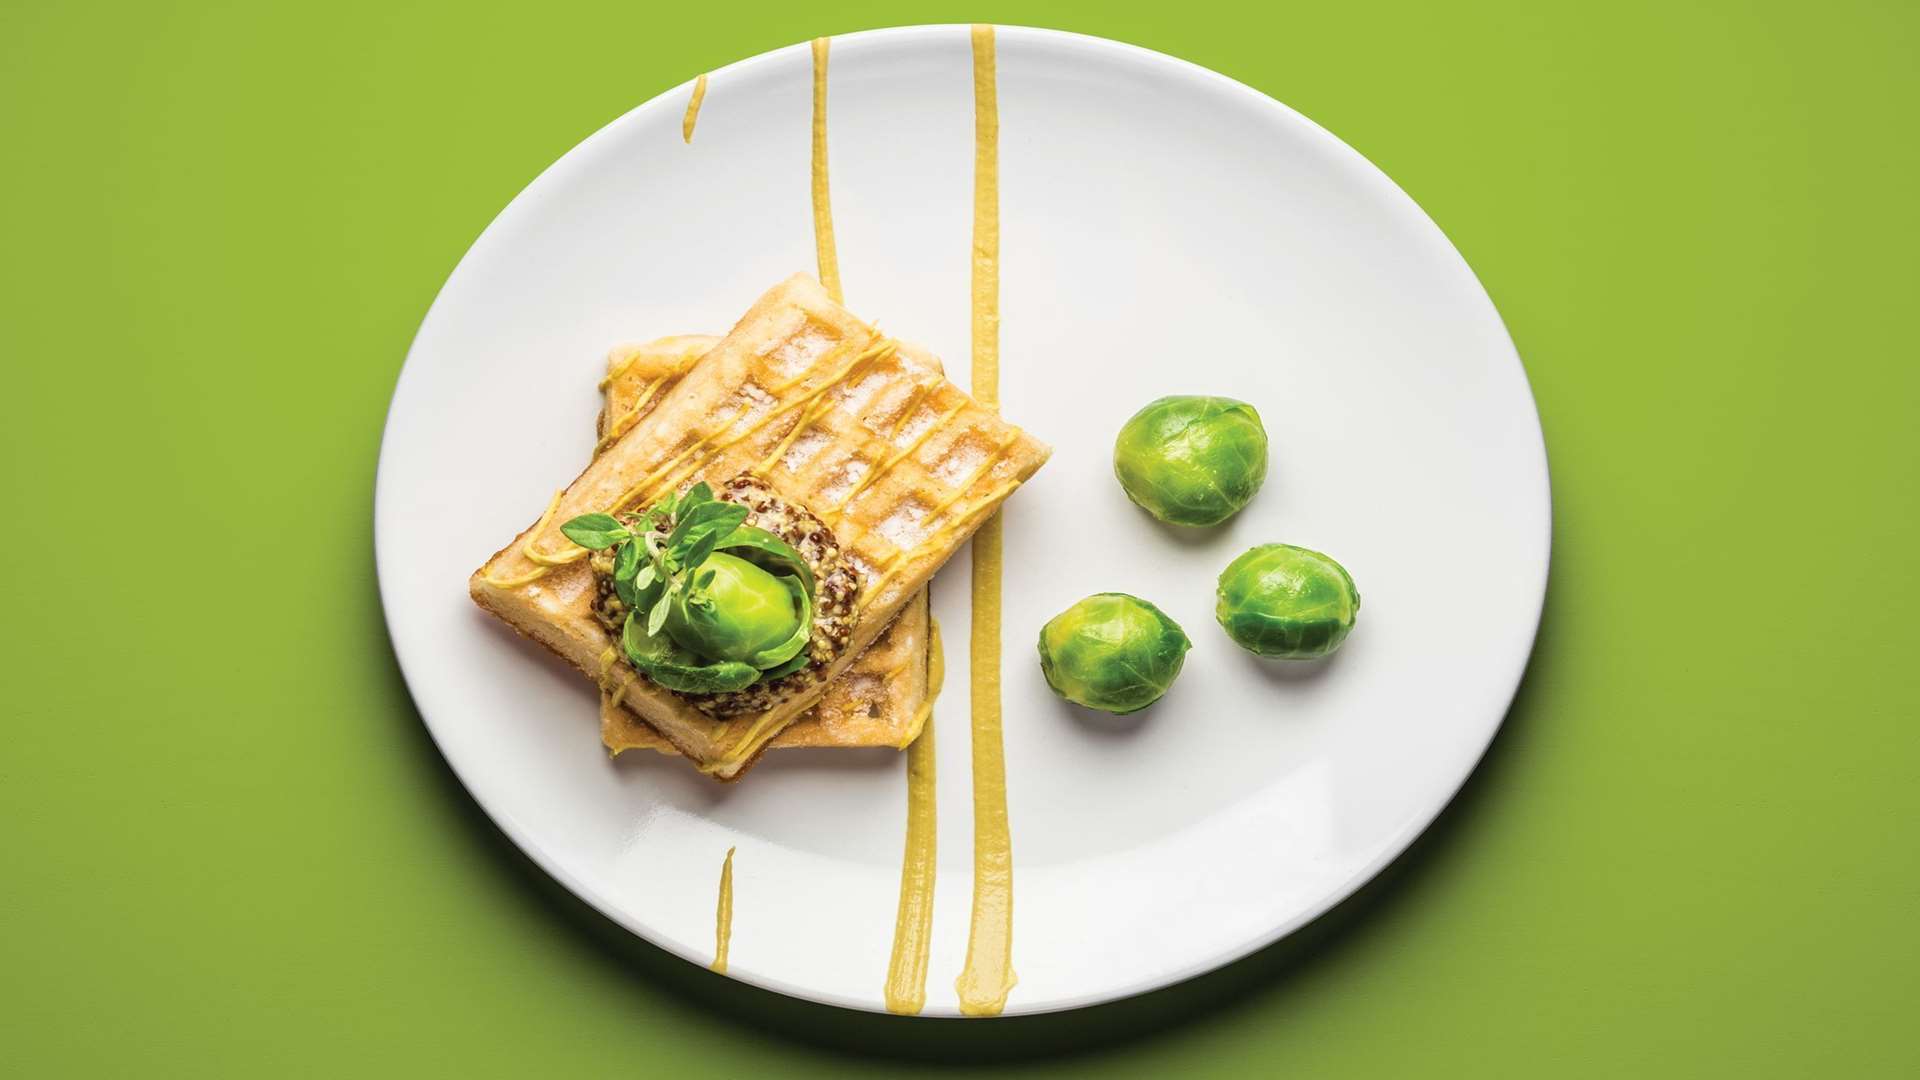 Hot stuff - waffles with mustard and Brussels sprouts